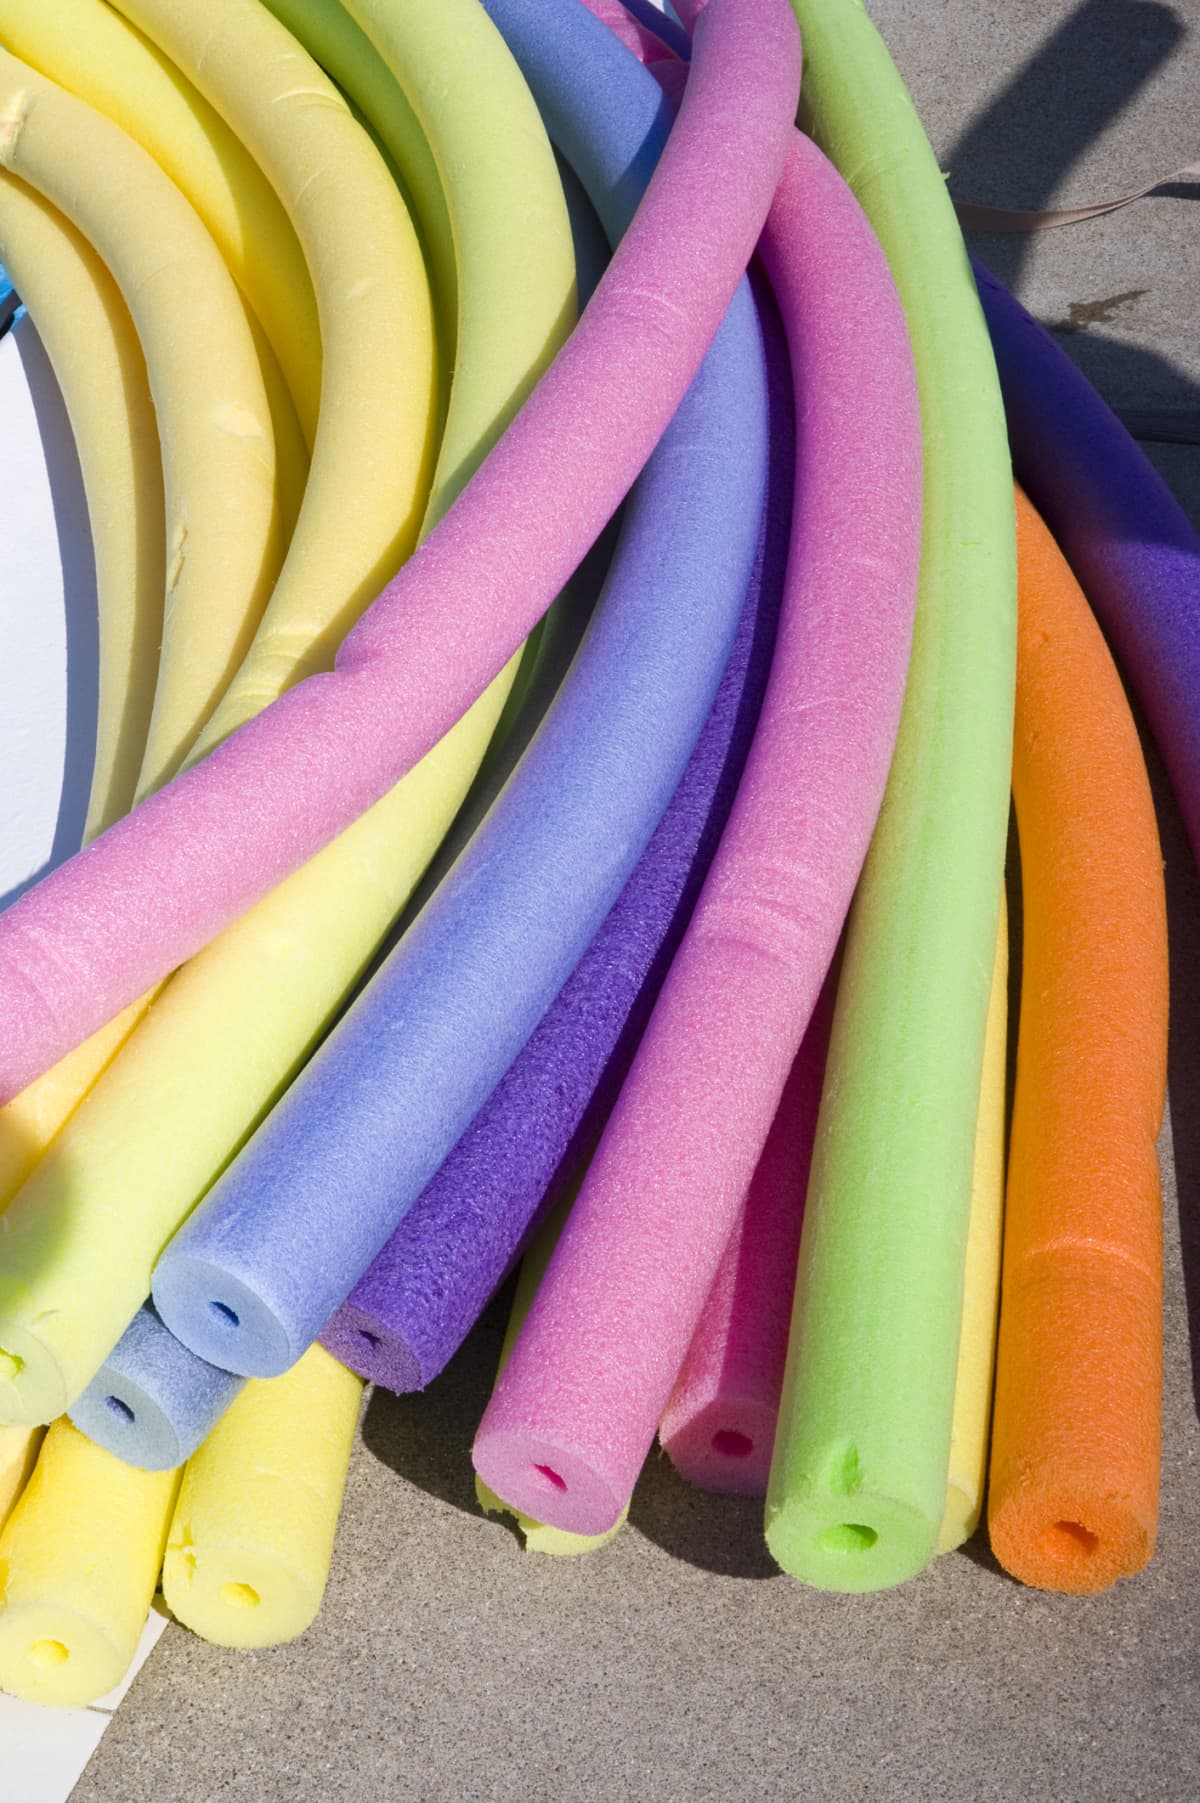 A multicolored assortment of pool noodles